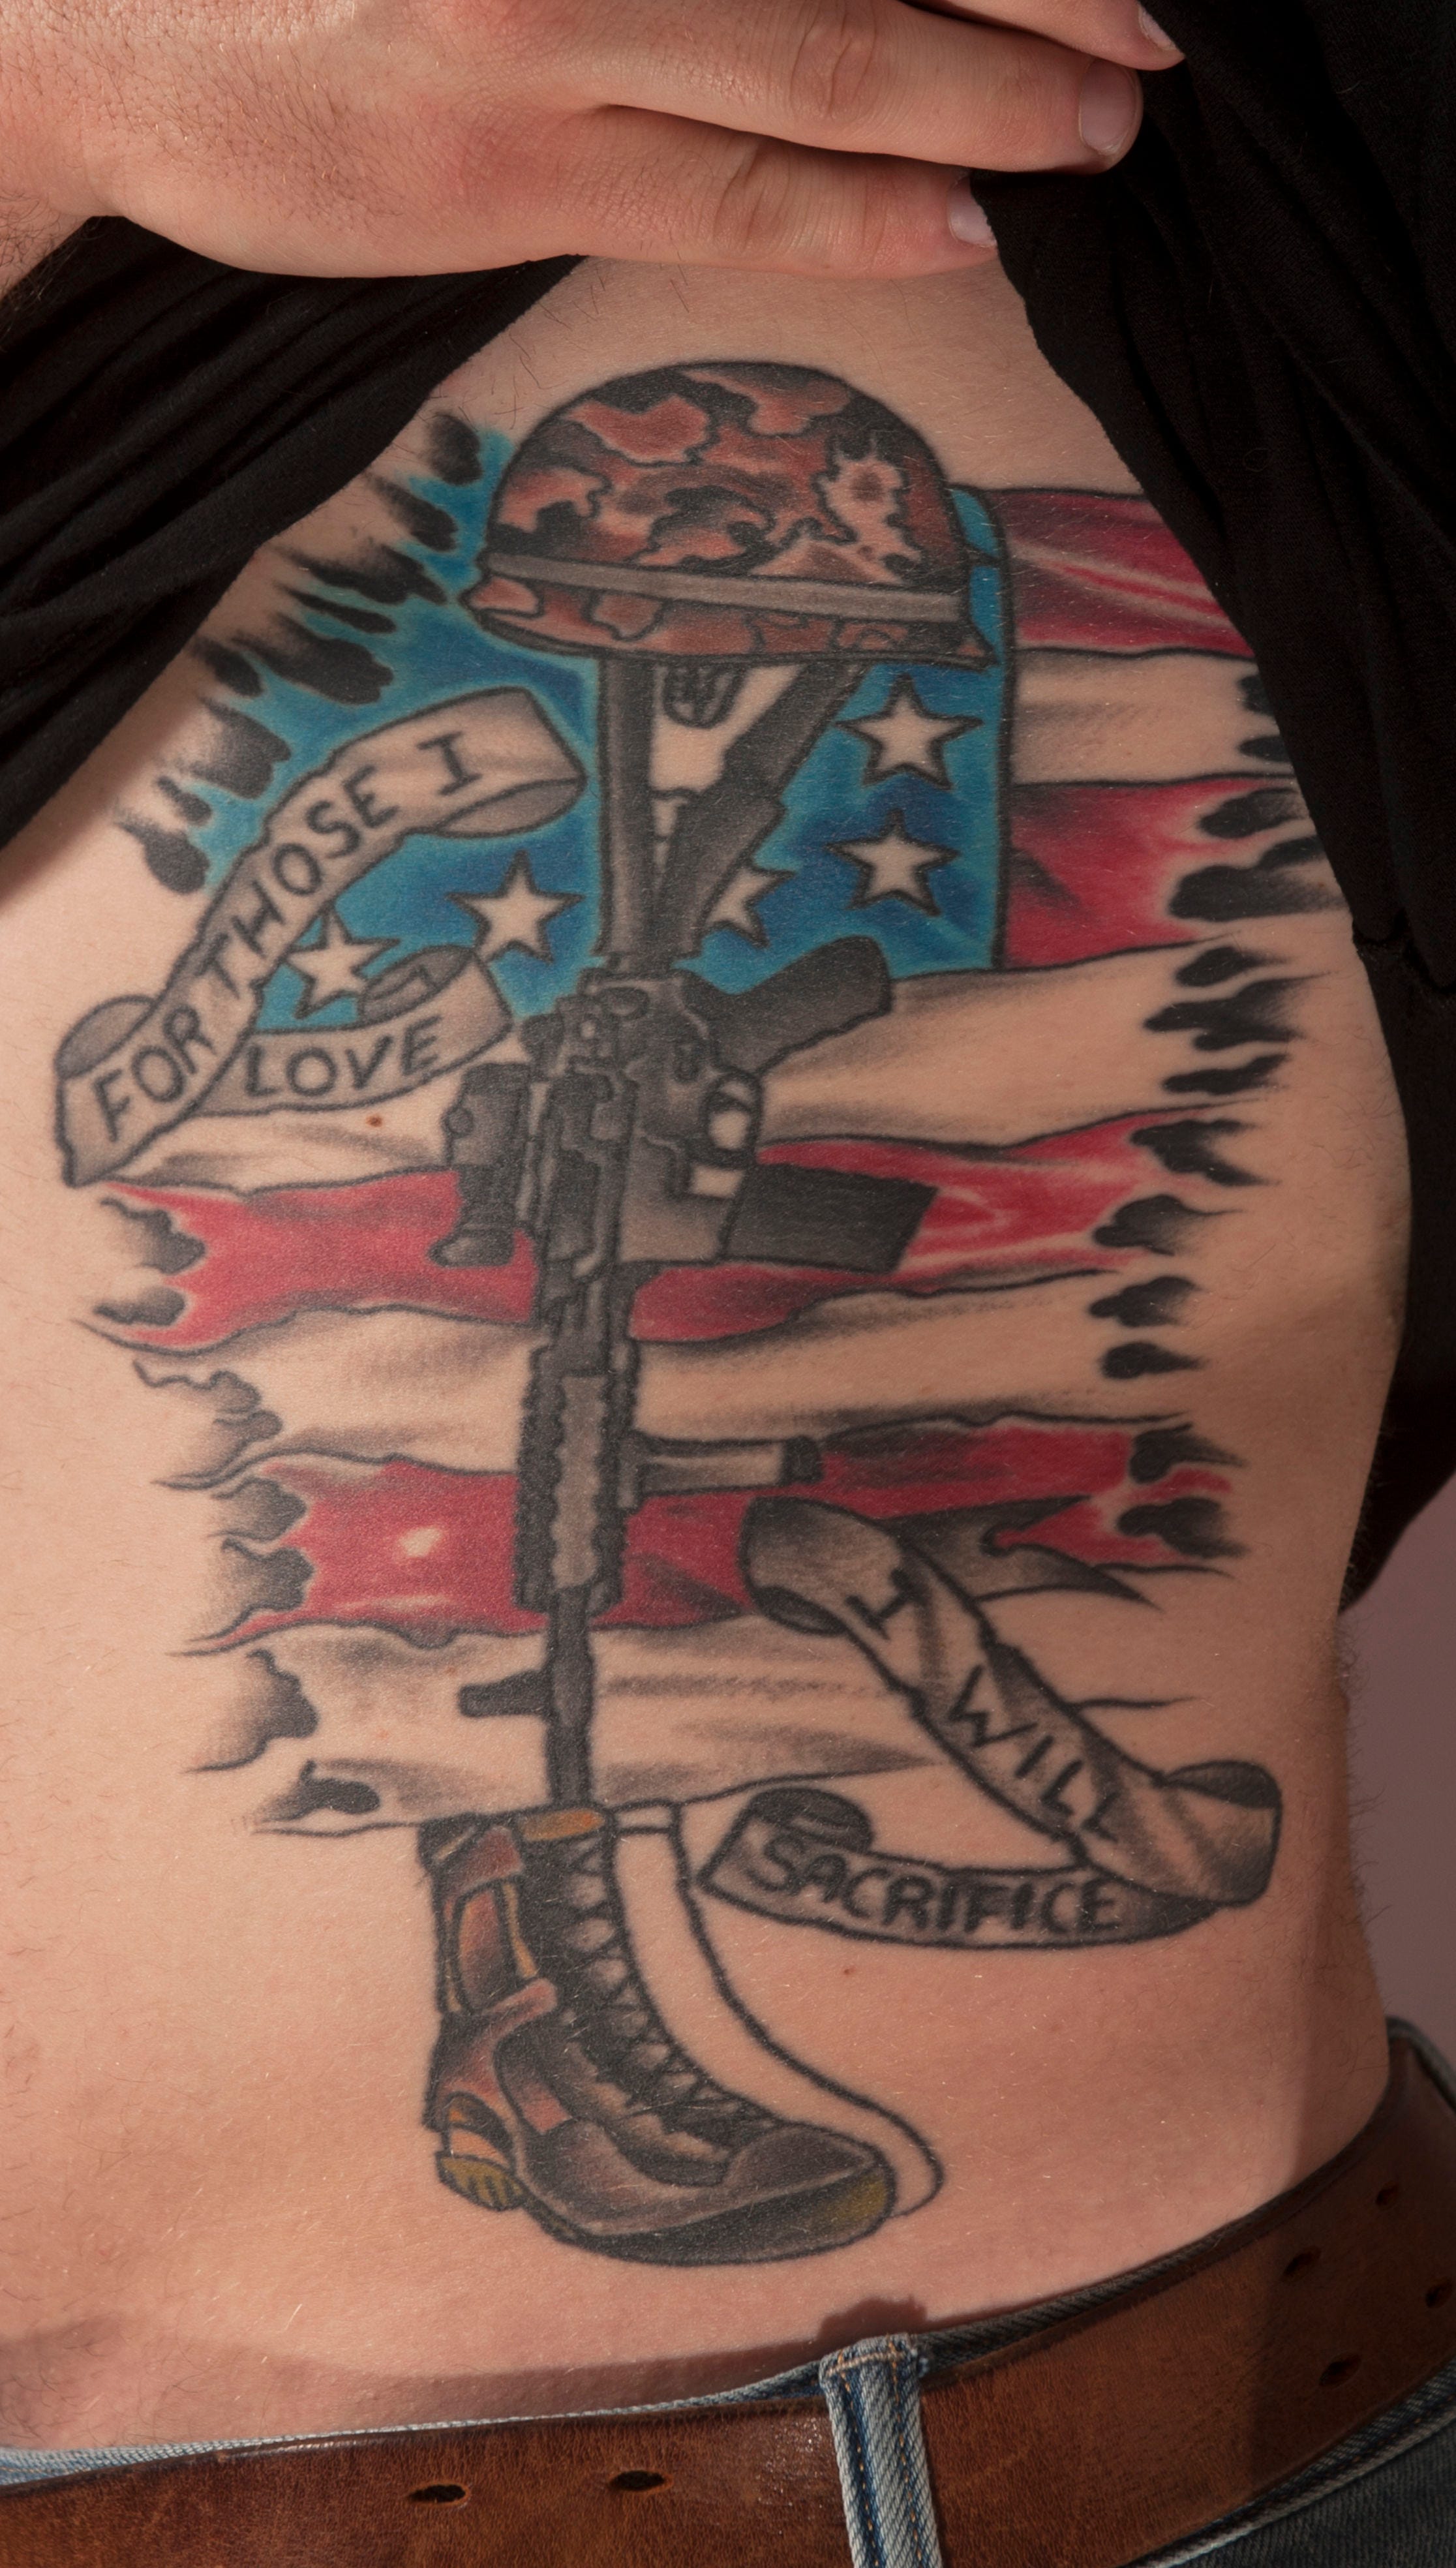 Military tattoos evolve into tributes in South Jersey